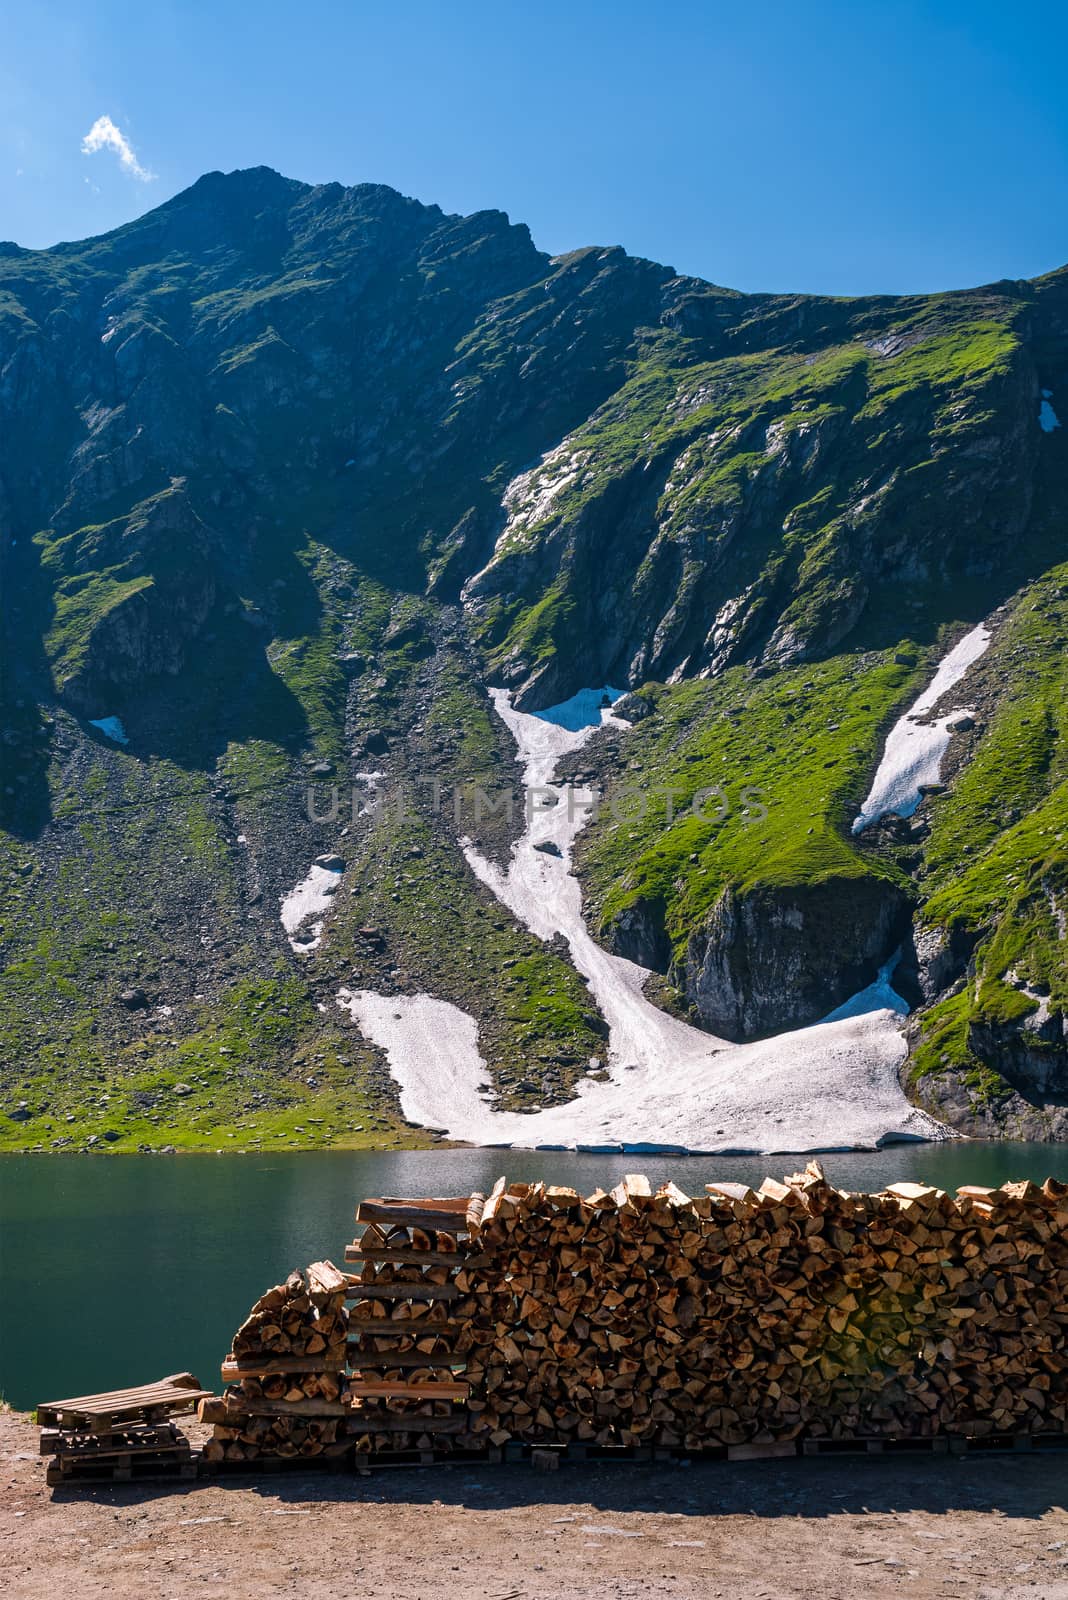 chopped firewood on the shore of a glacier by Pellinni